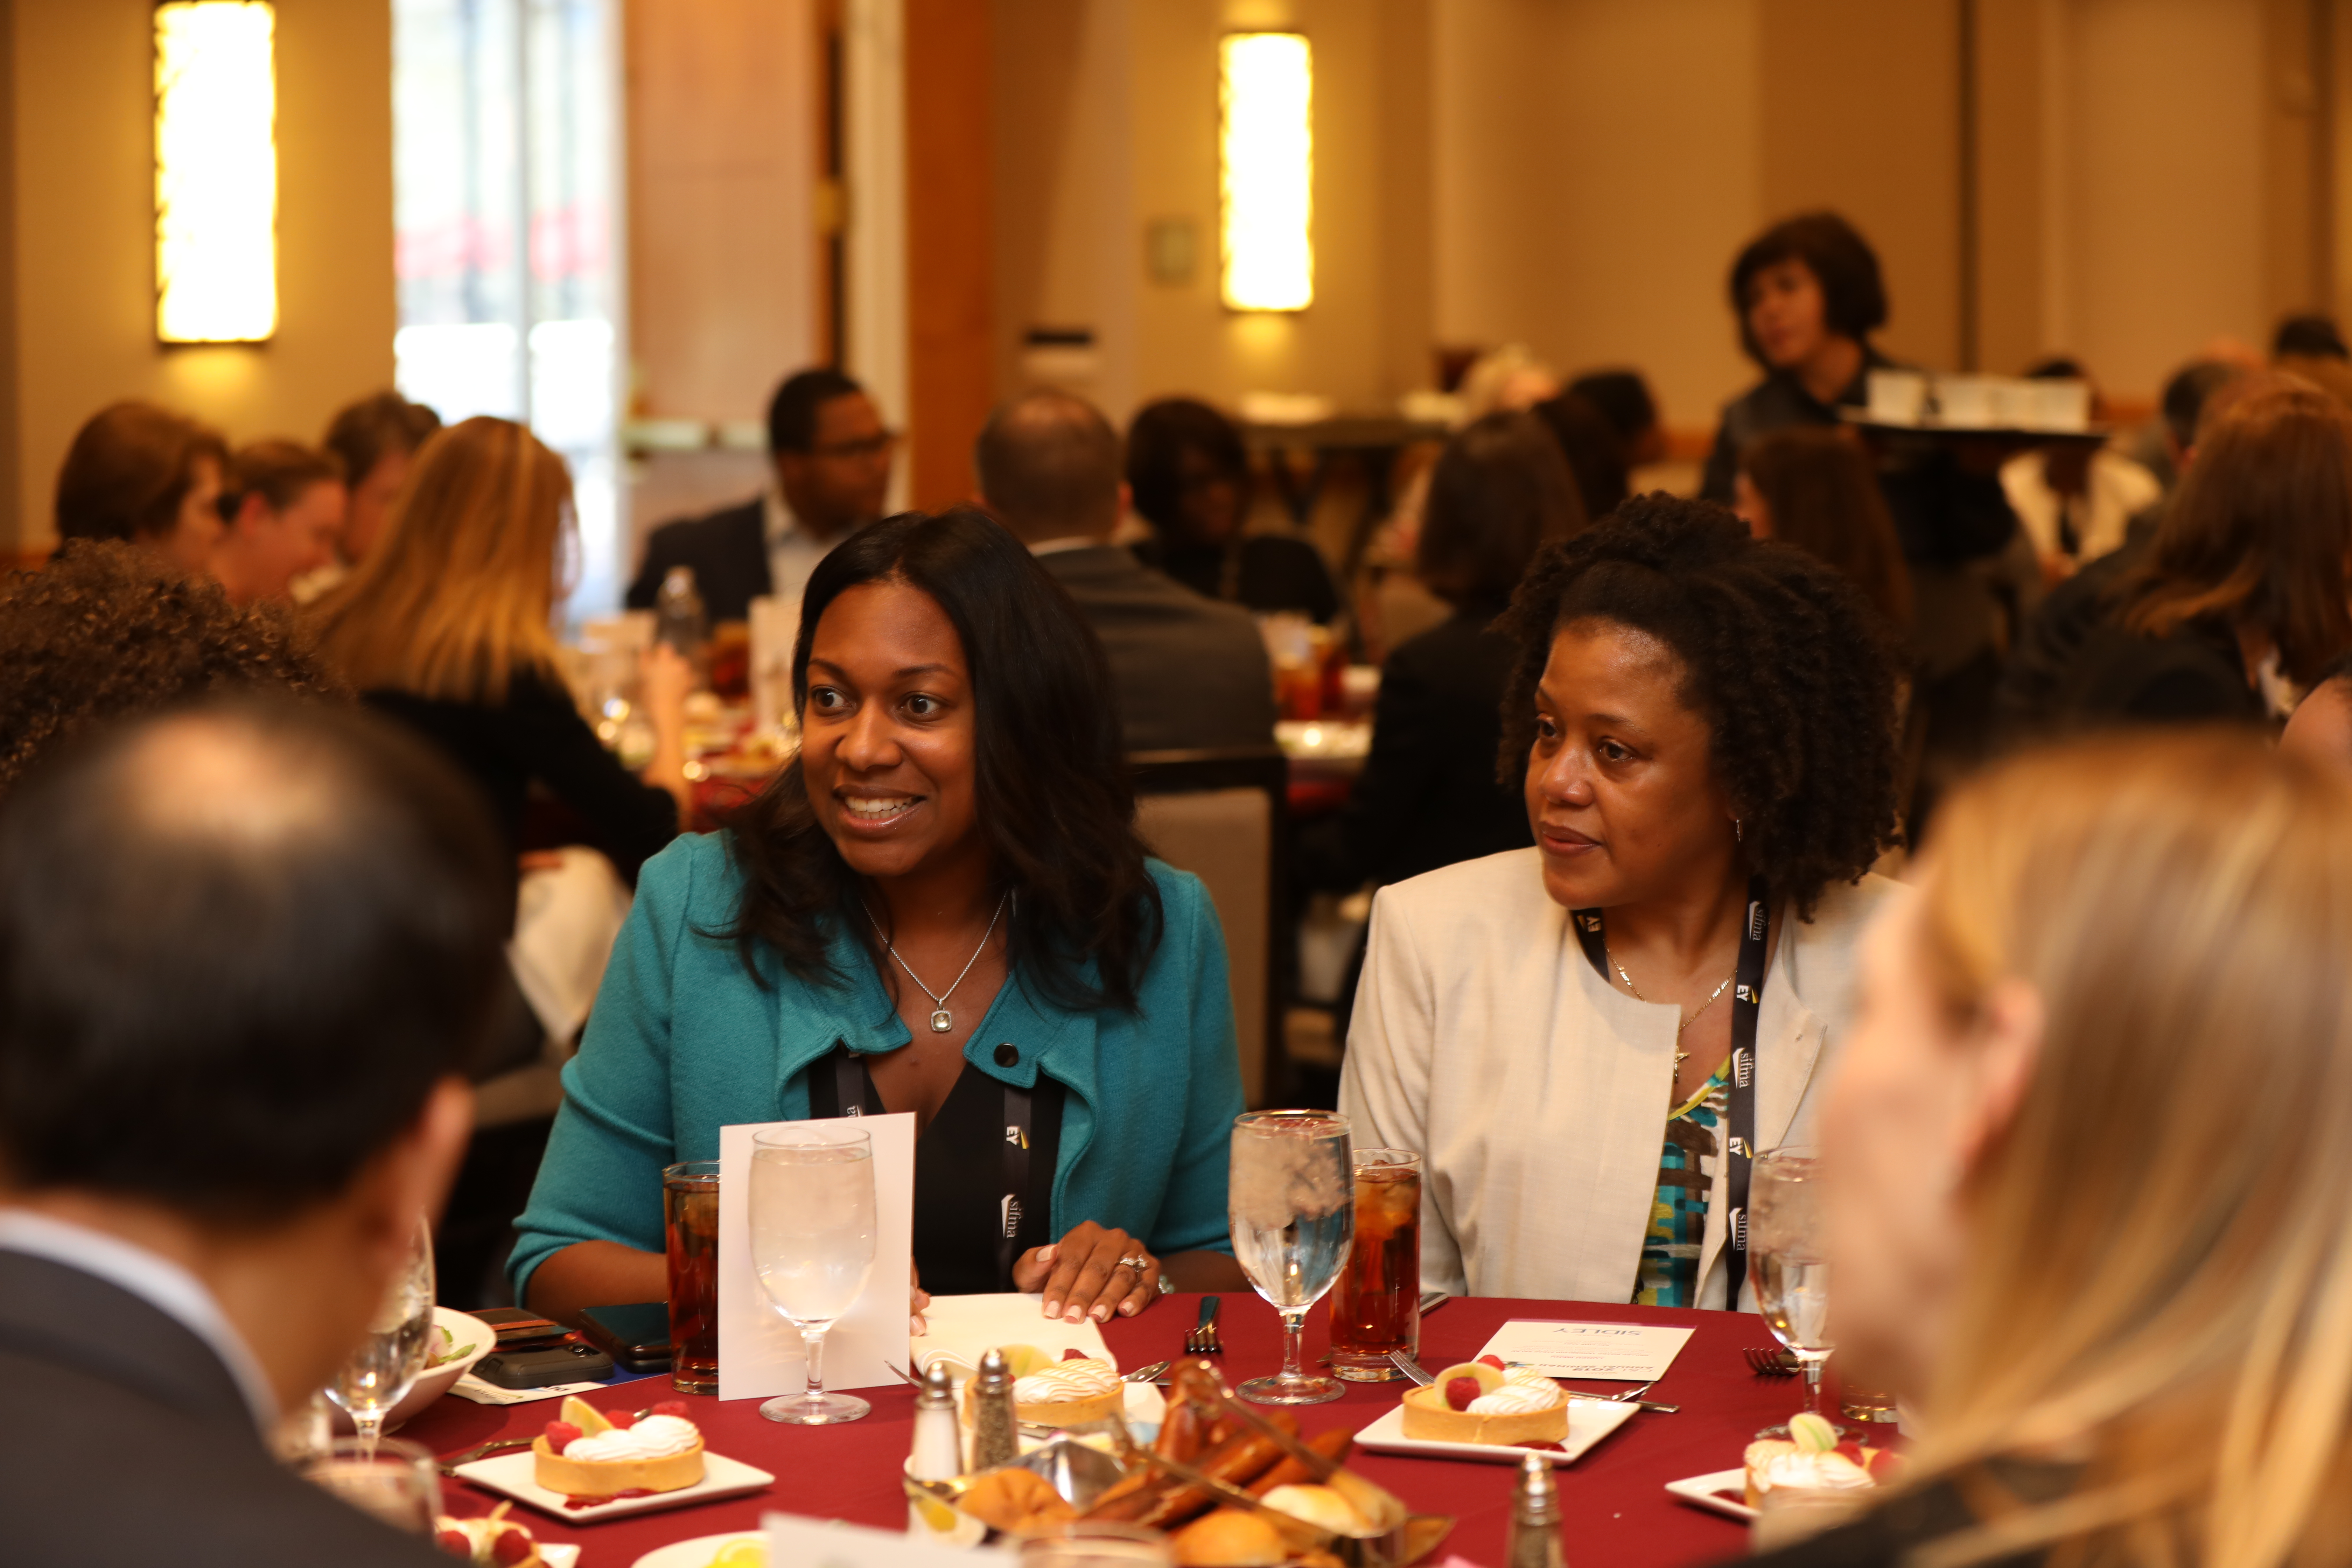 Participants in the Diversity & Inclusion Luncheon at SIFMA's 2019 C&L Annual Seminar discuss how to foster an environment of diversity and inclusion in their organizations.